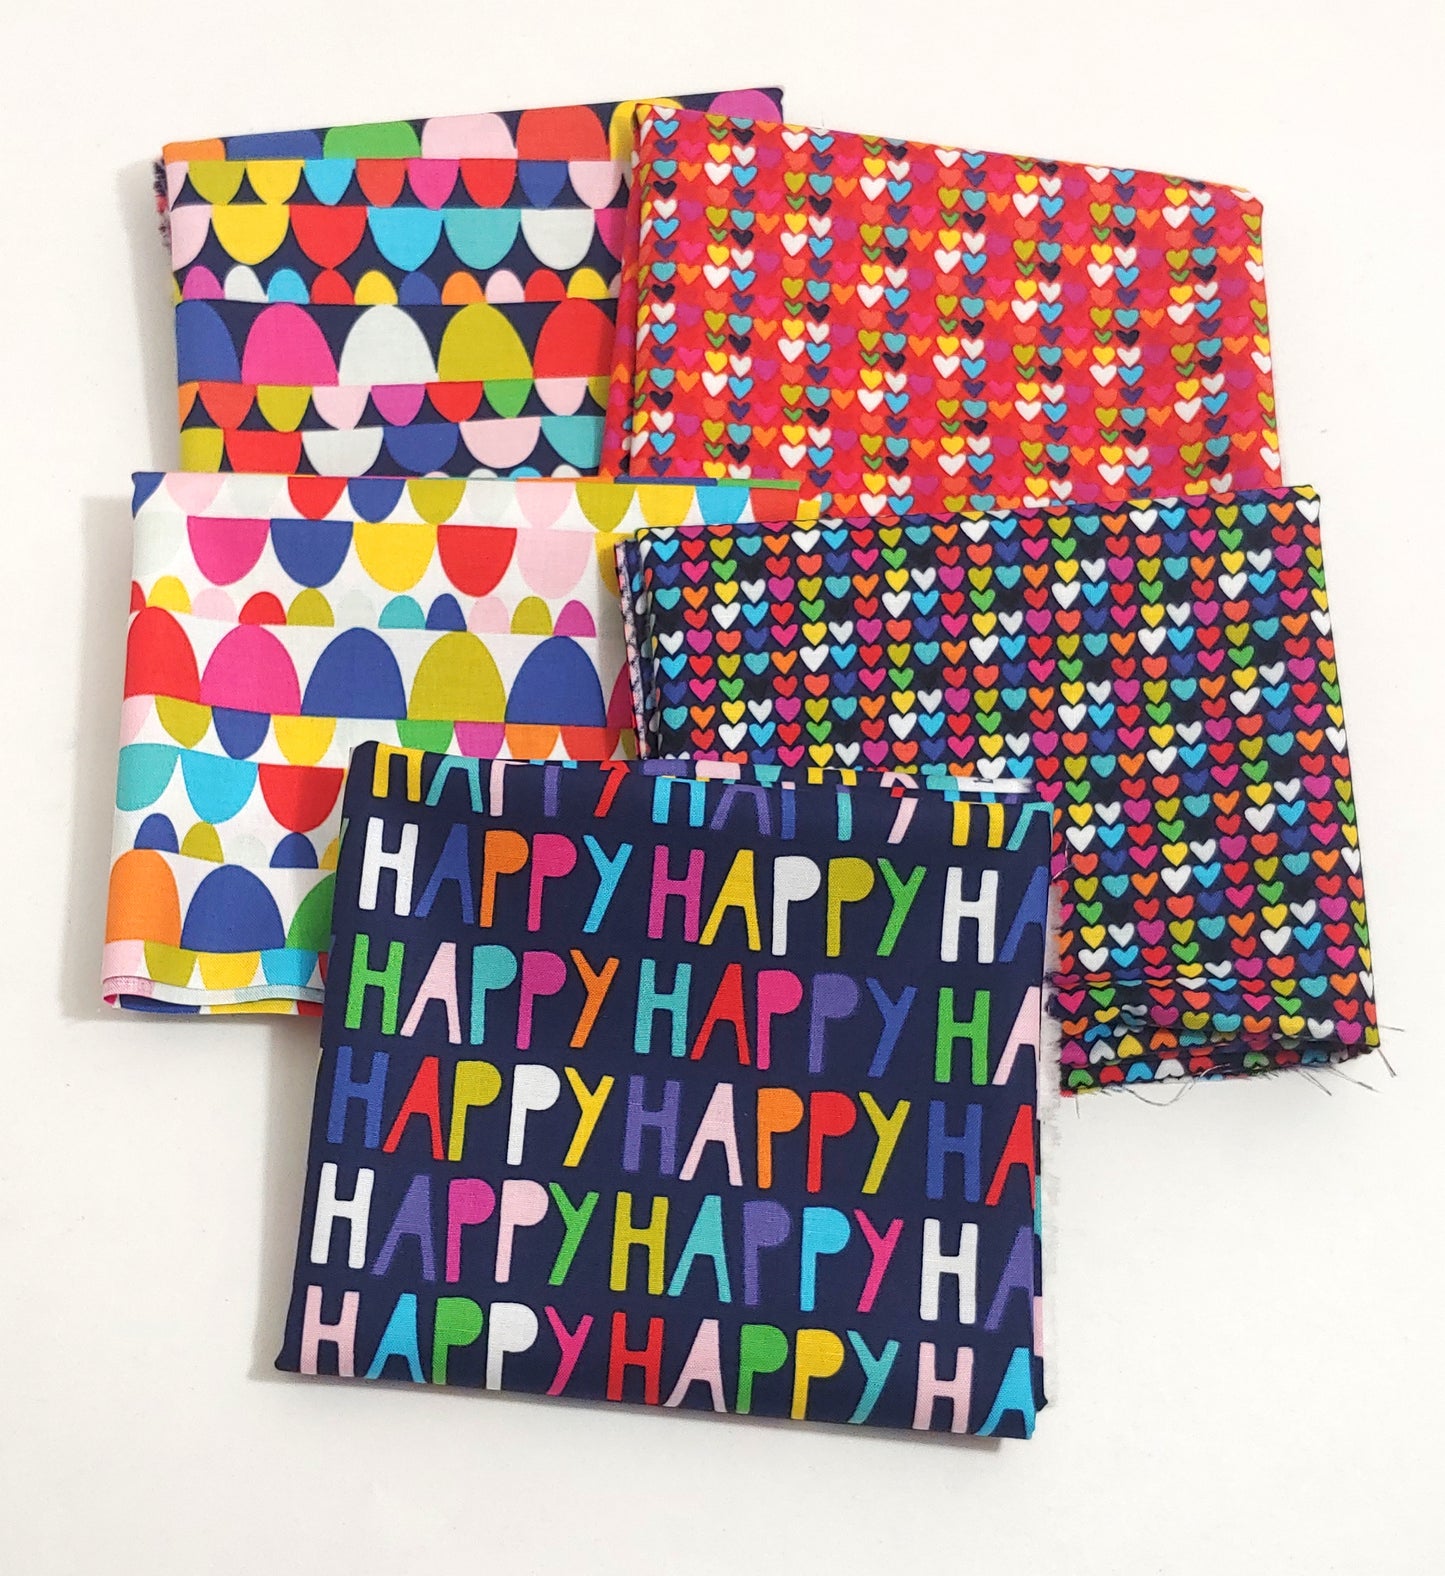 Happy! ♥ 5 PCS ♥ Curated